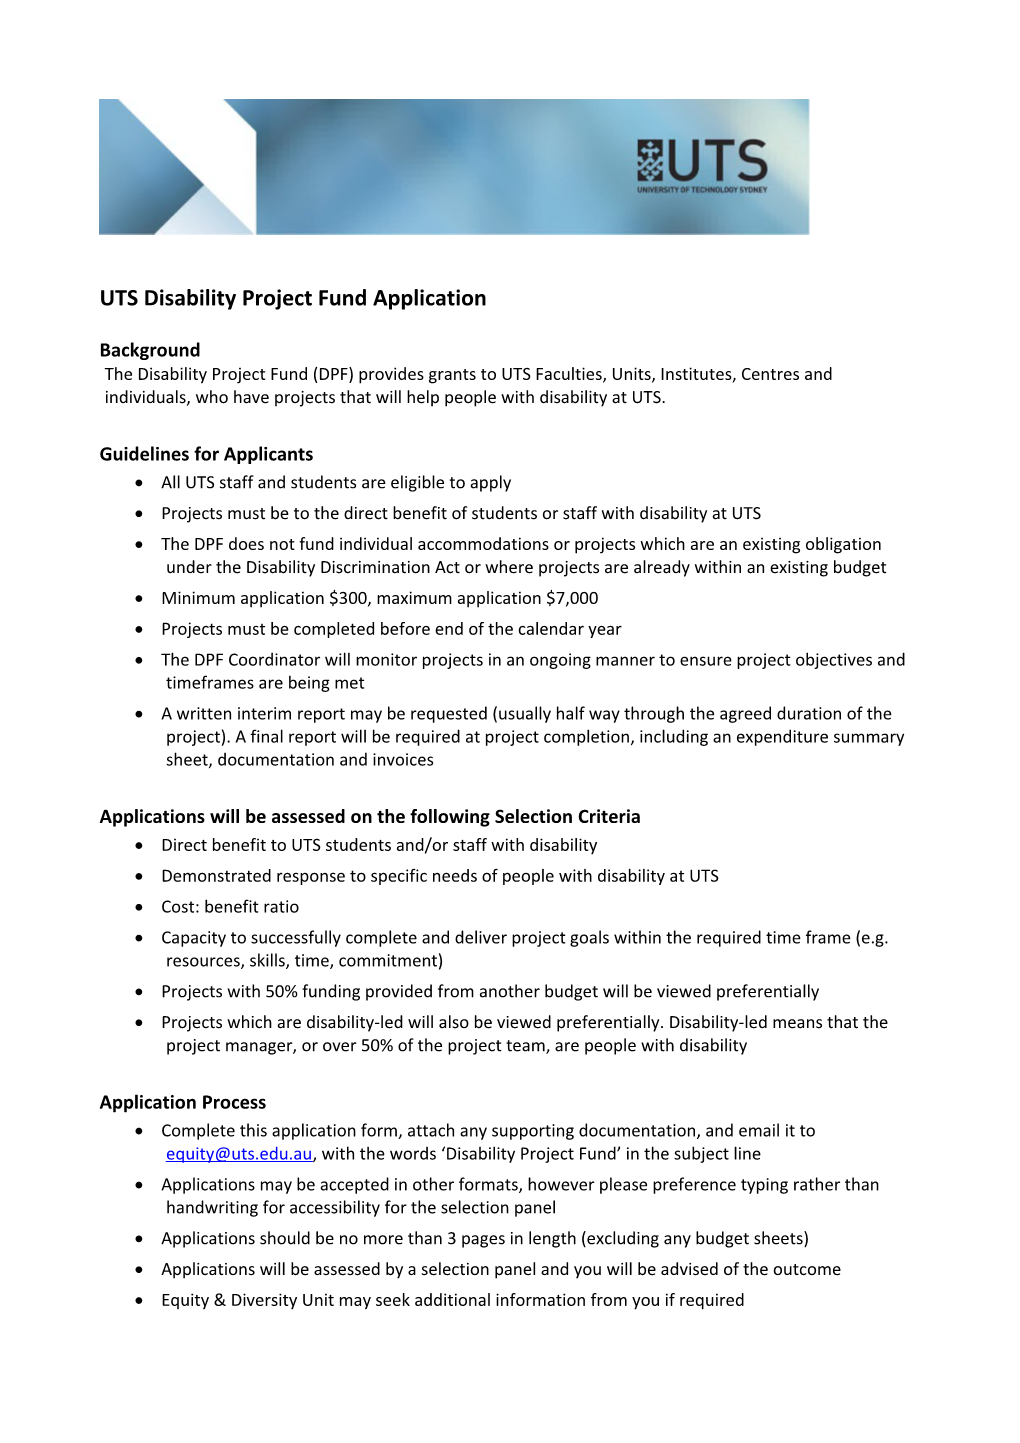 UTS Disability Projects Fund Application Form 2007